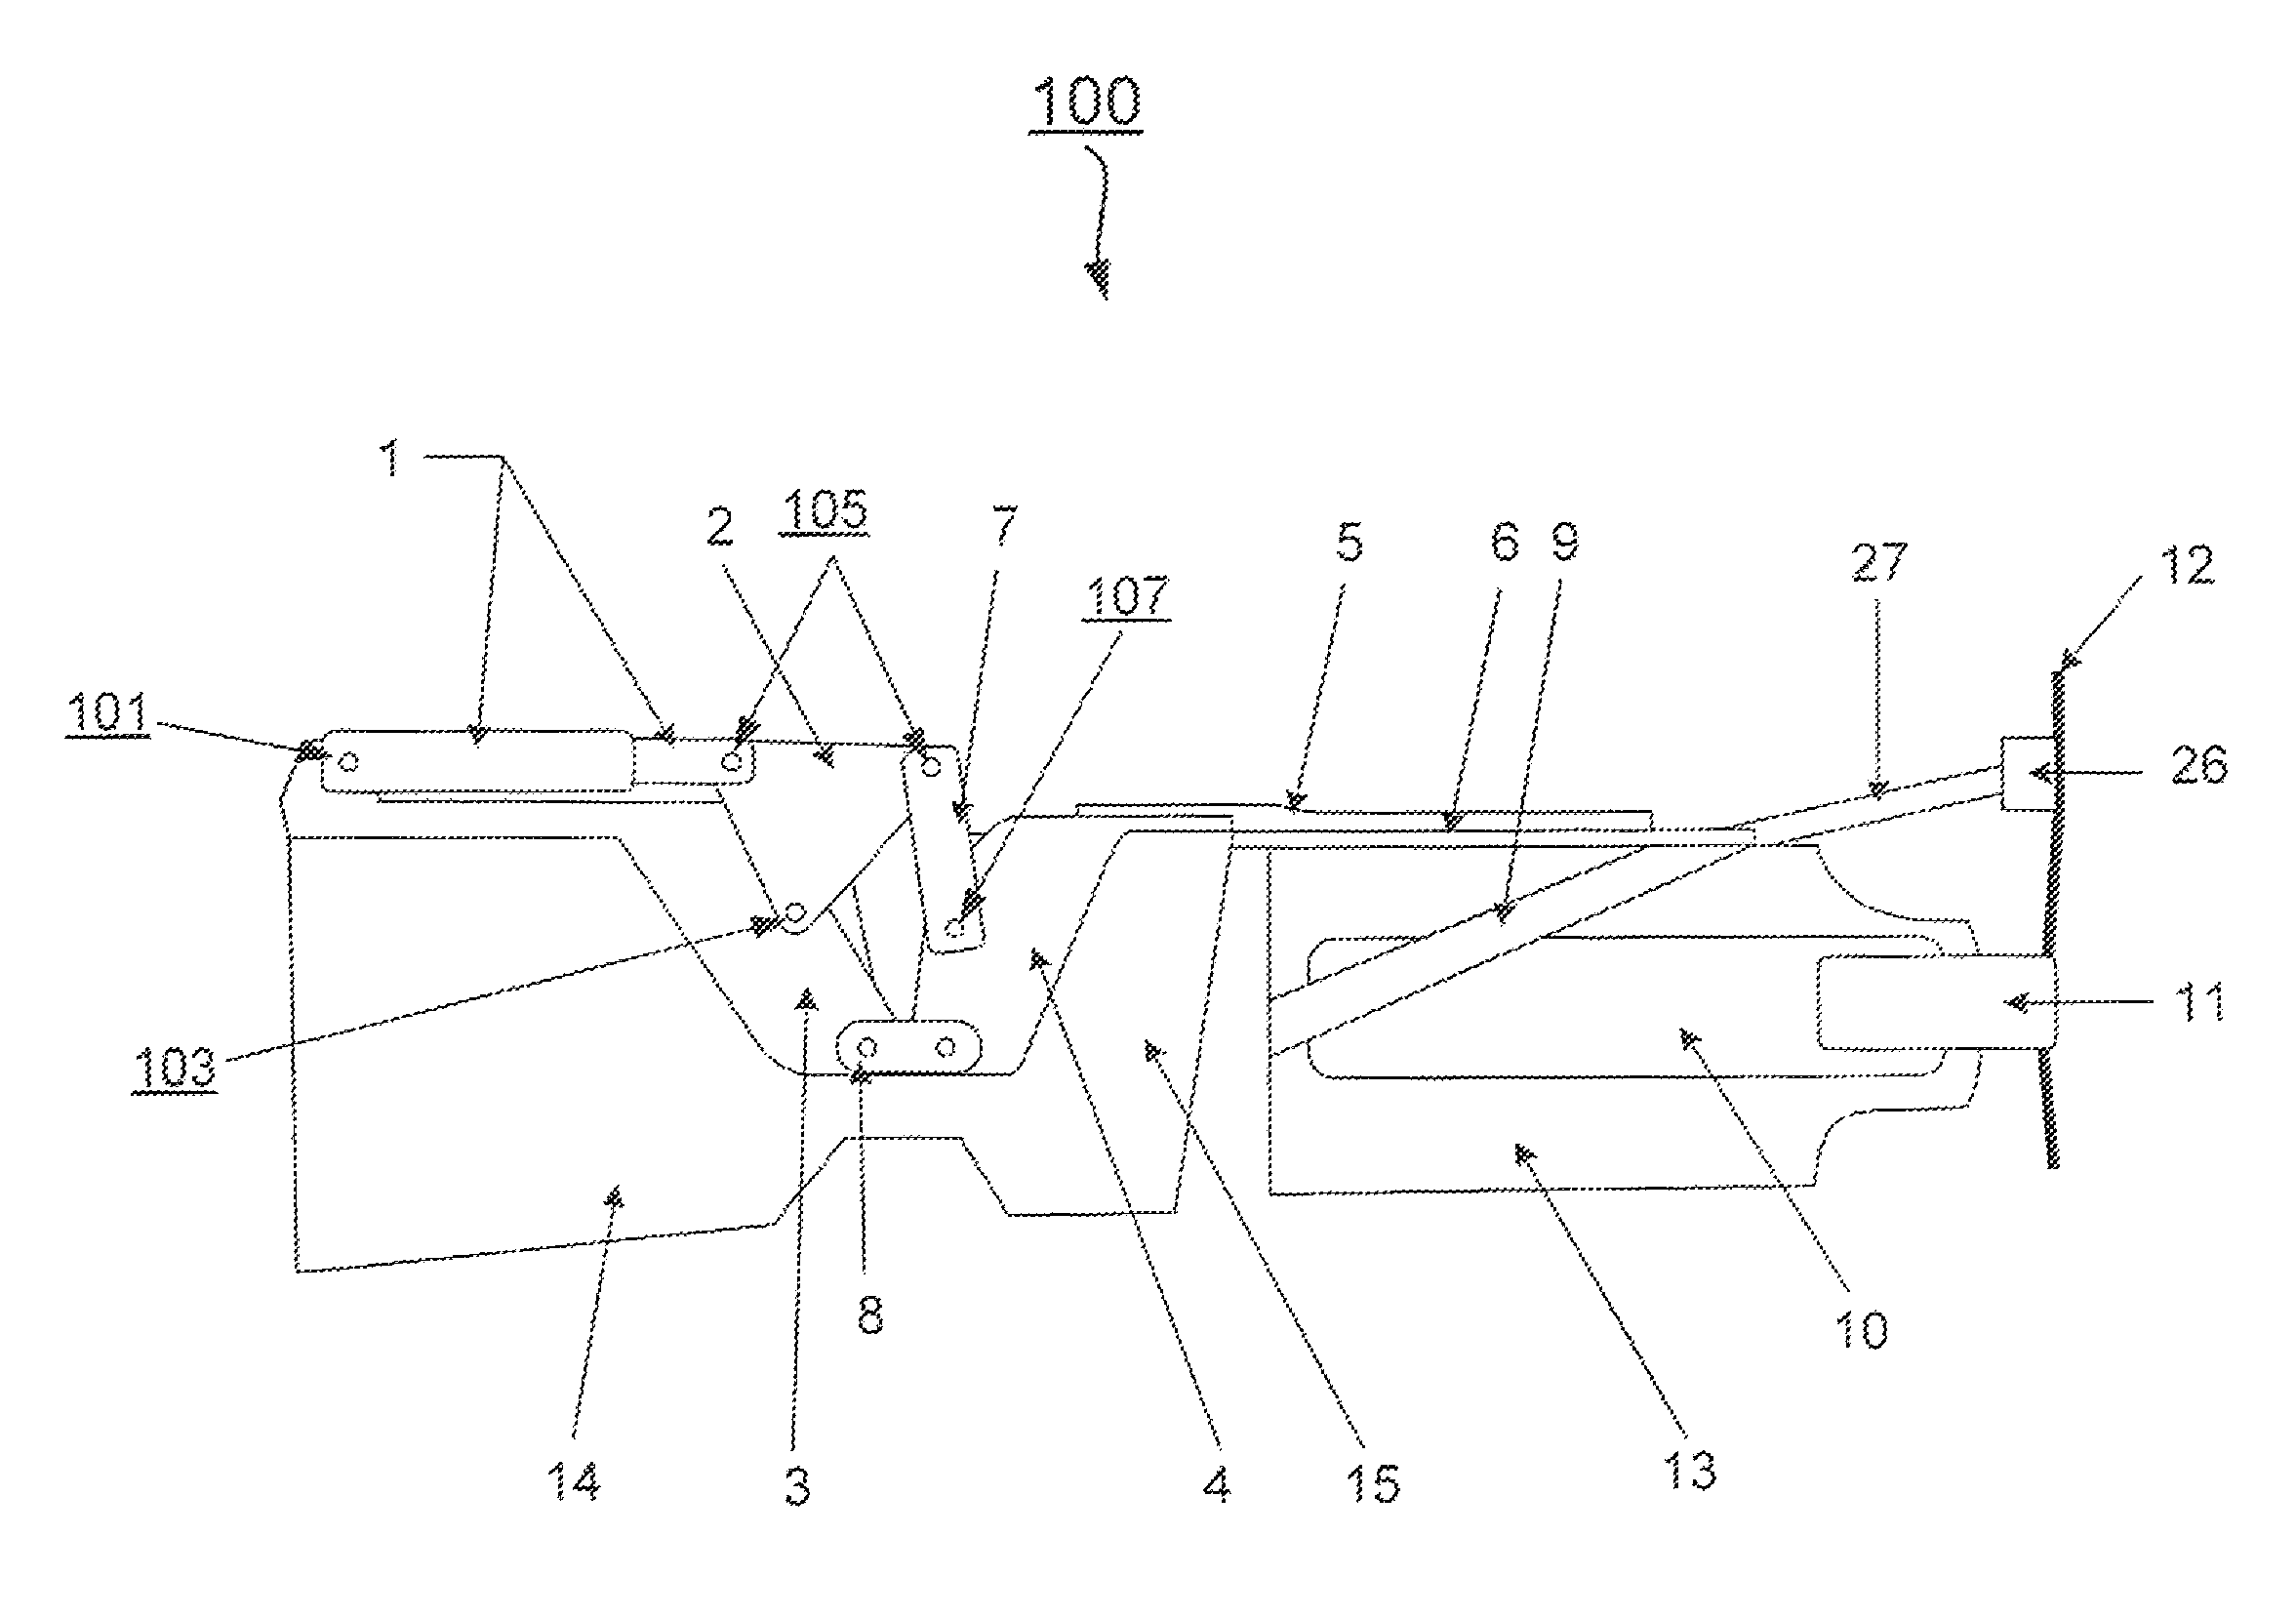 Multi-fit orthotic and mobility assistance apparatus